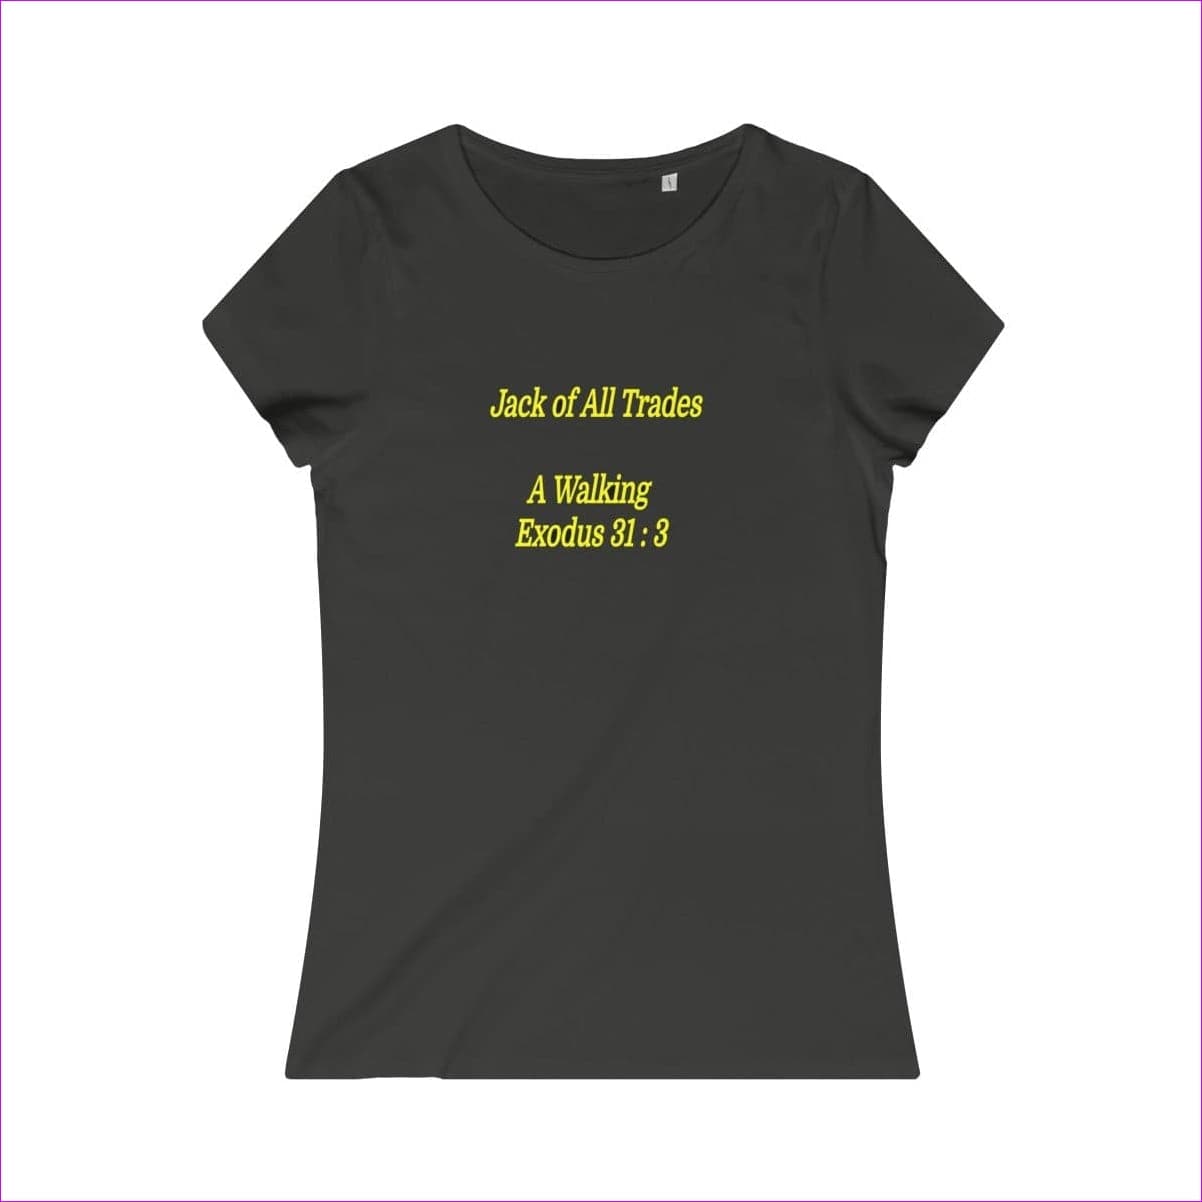 Anthracite - Jack of All Trades Womens Organic Tee - womens T-Shirt at TFC&H Co.